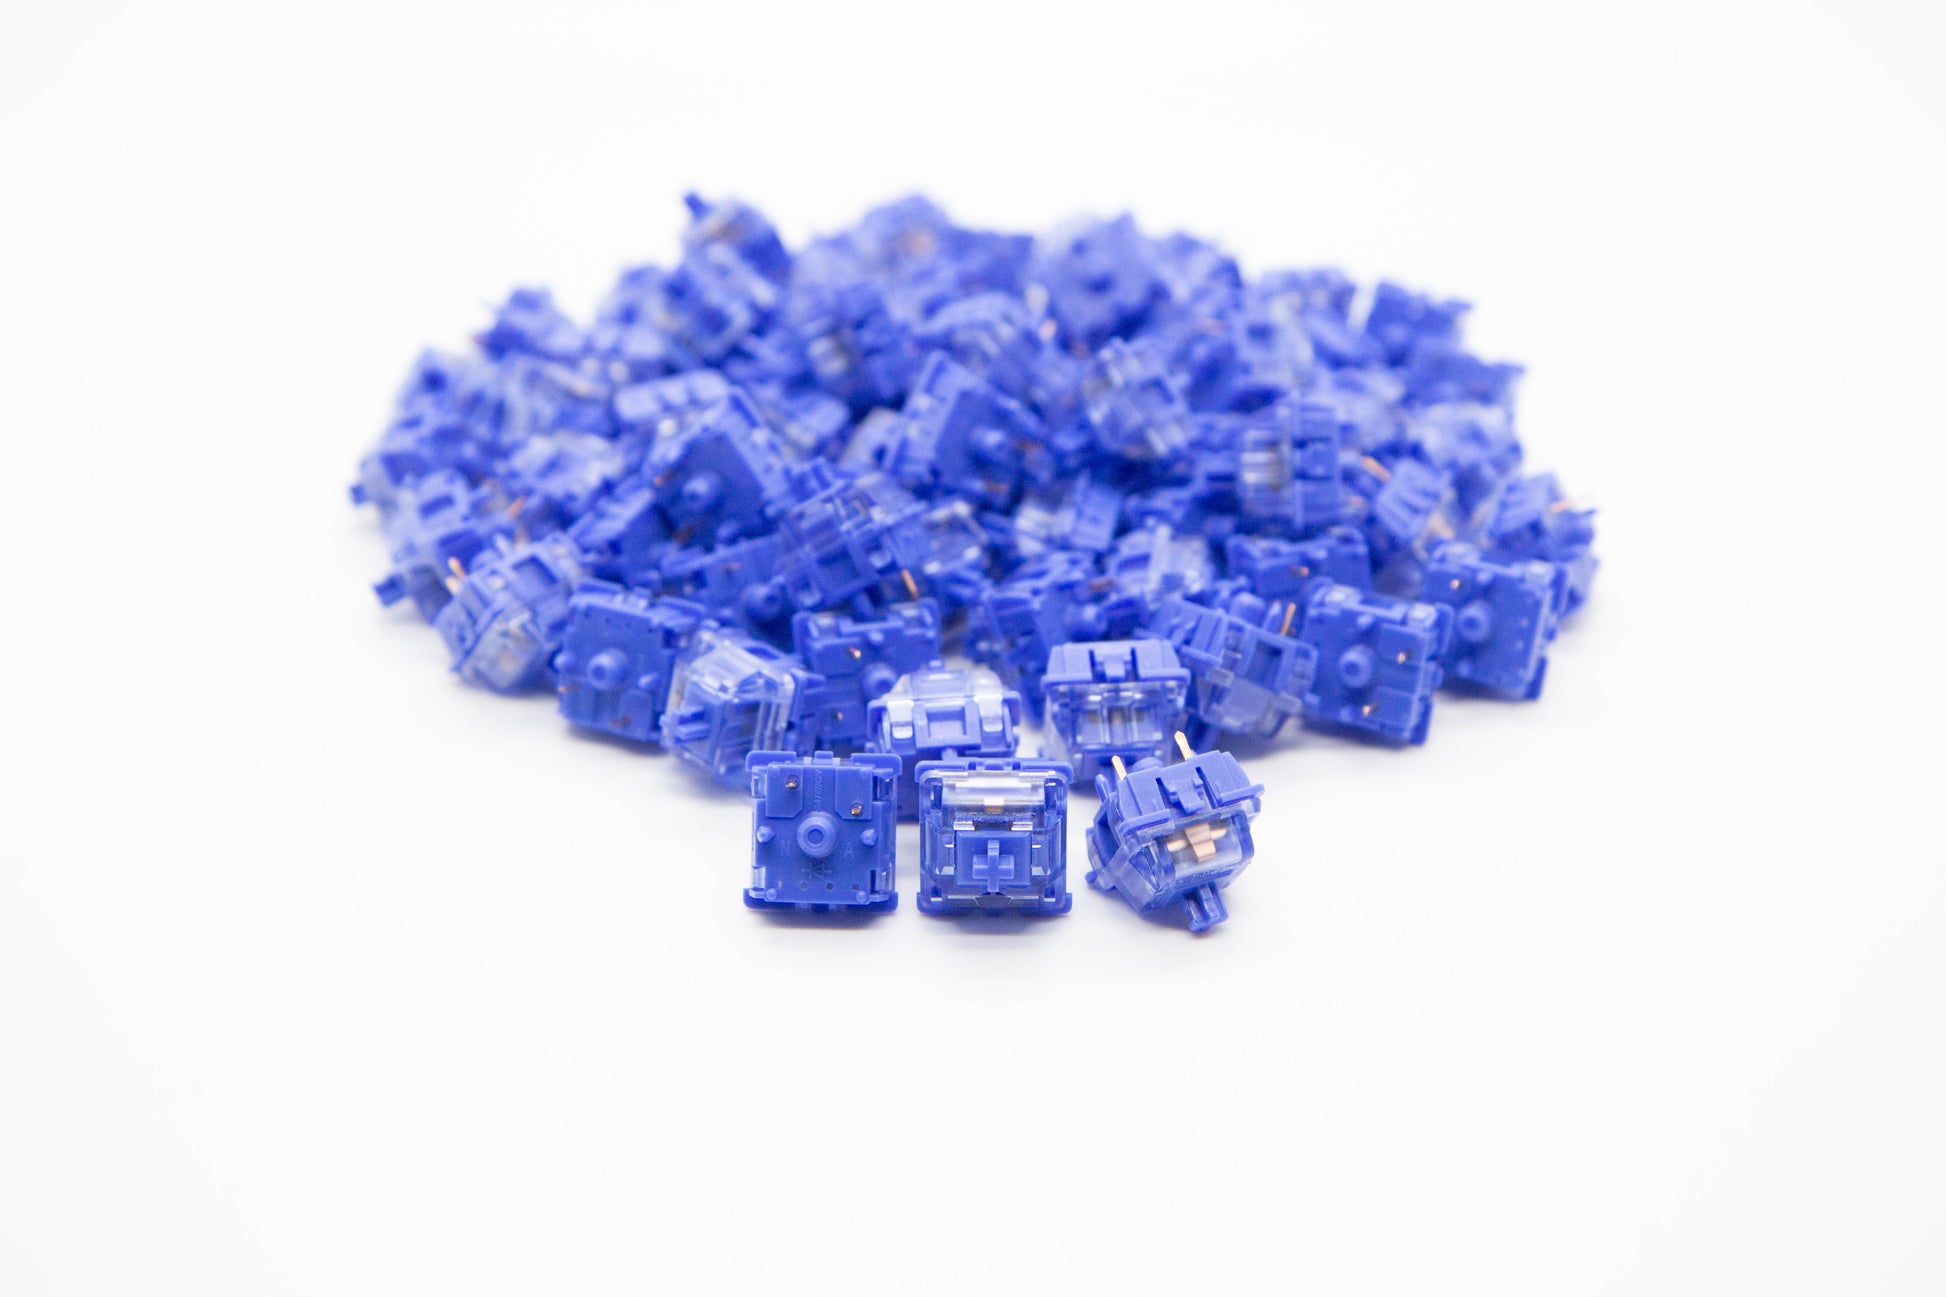 Close-up shot of a pile of Gateron CJ mechanical keyboard switches featuring blue housing and blue stems